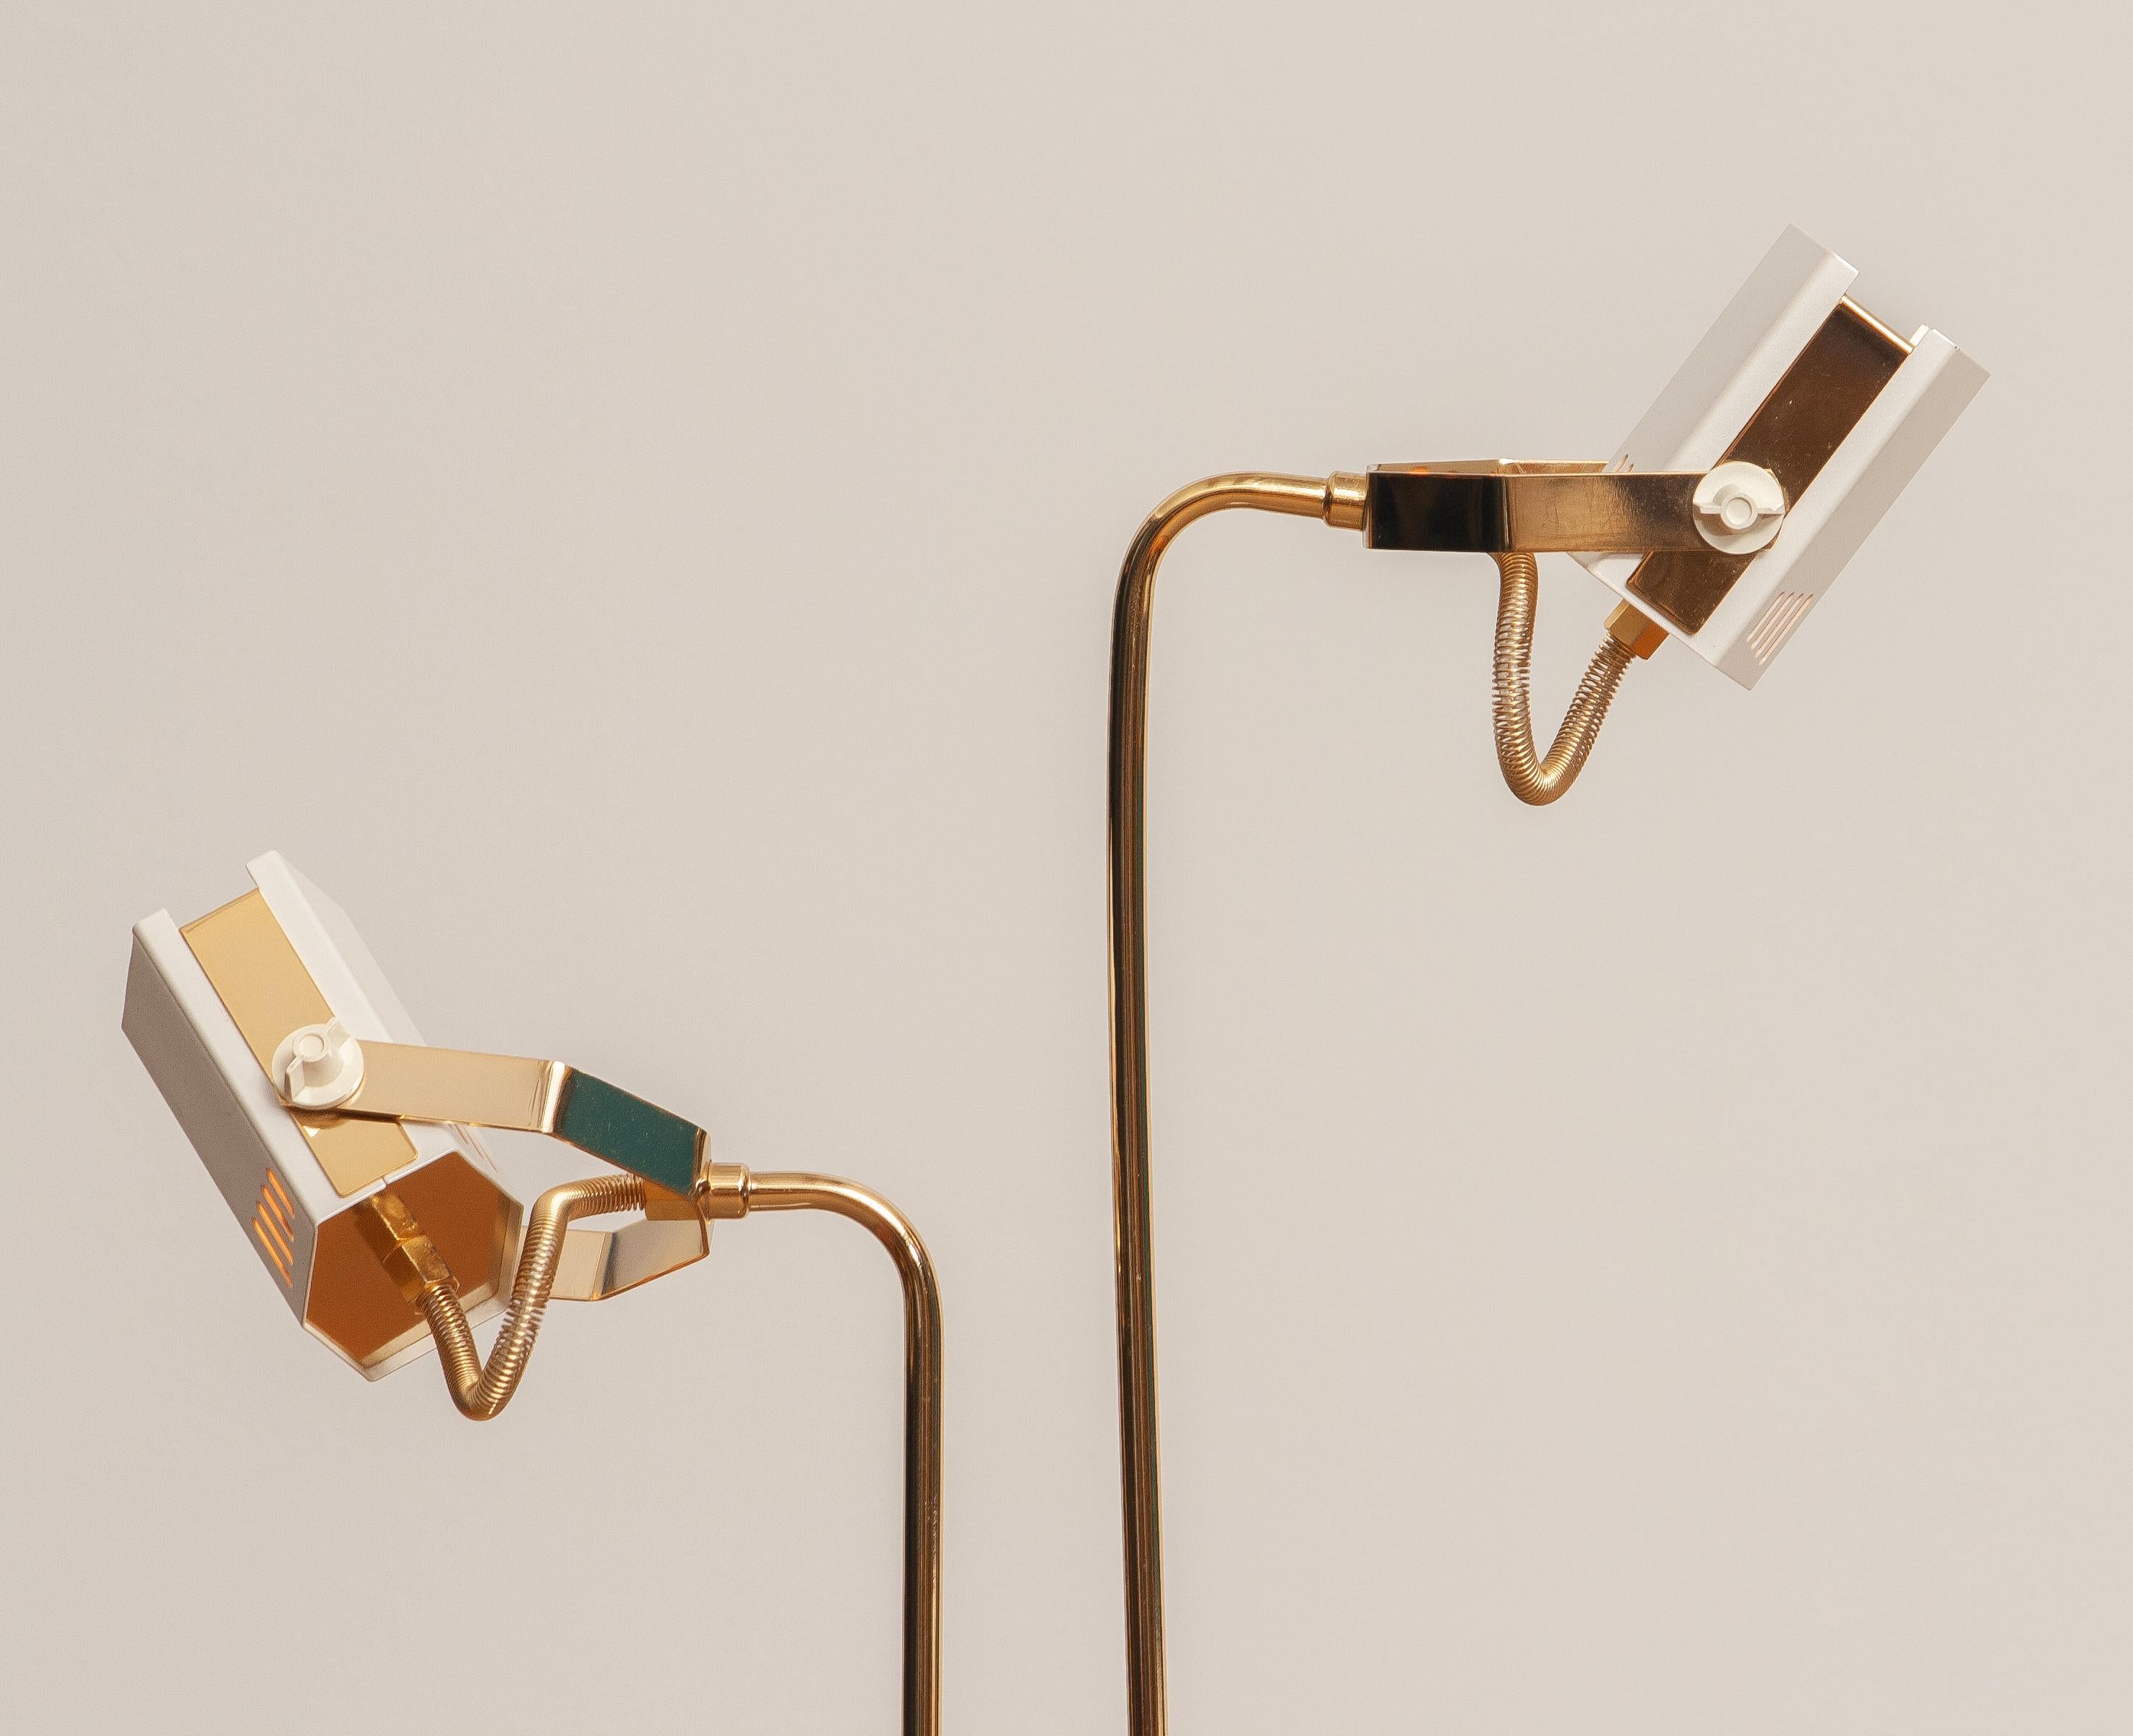 1980s, White-Pearl Lacquered Metal and Brass Halogen Floor Lamp from Italy 1